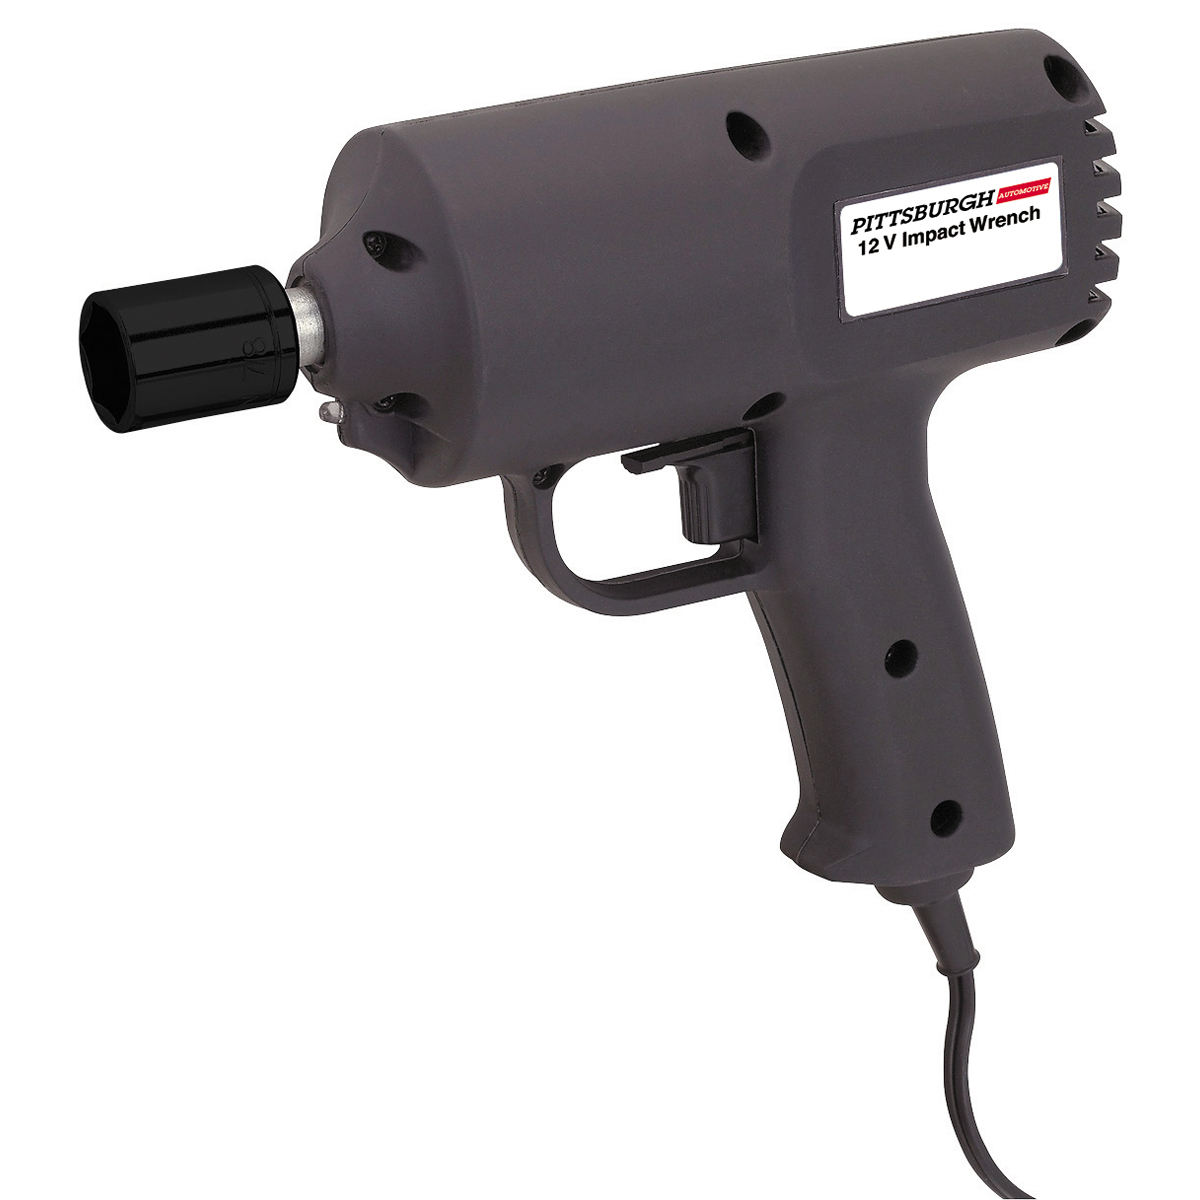 PITTSBURGH AUTOMOTIVE 12V 1/2 in. Emergency Impact Wrench - Item 92349